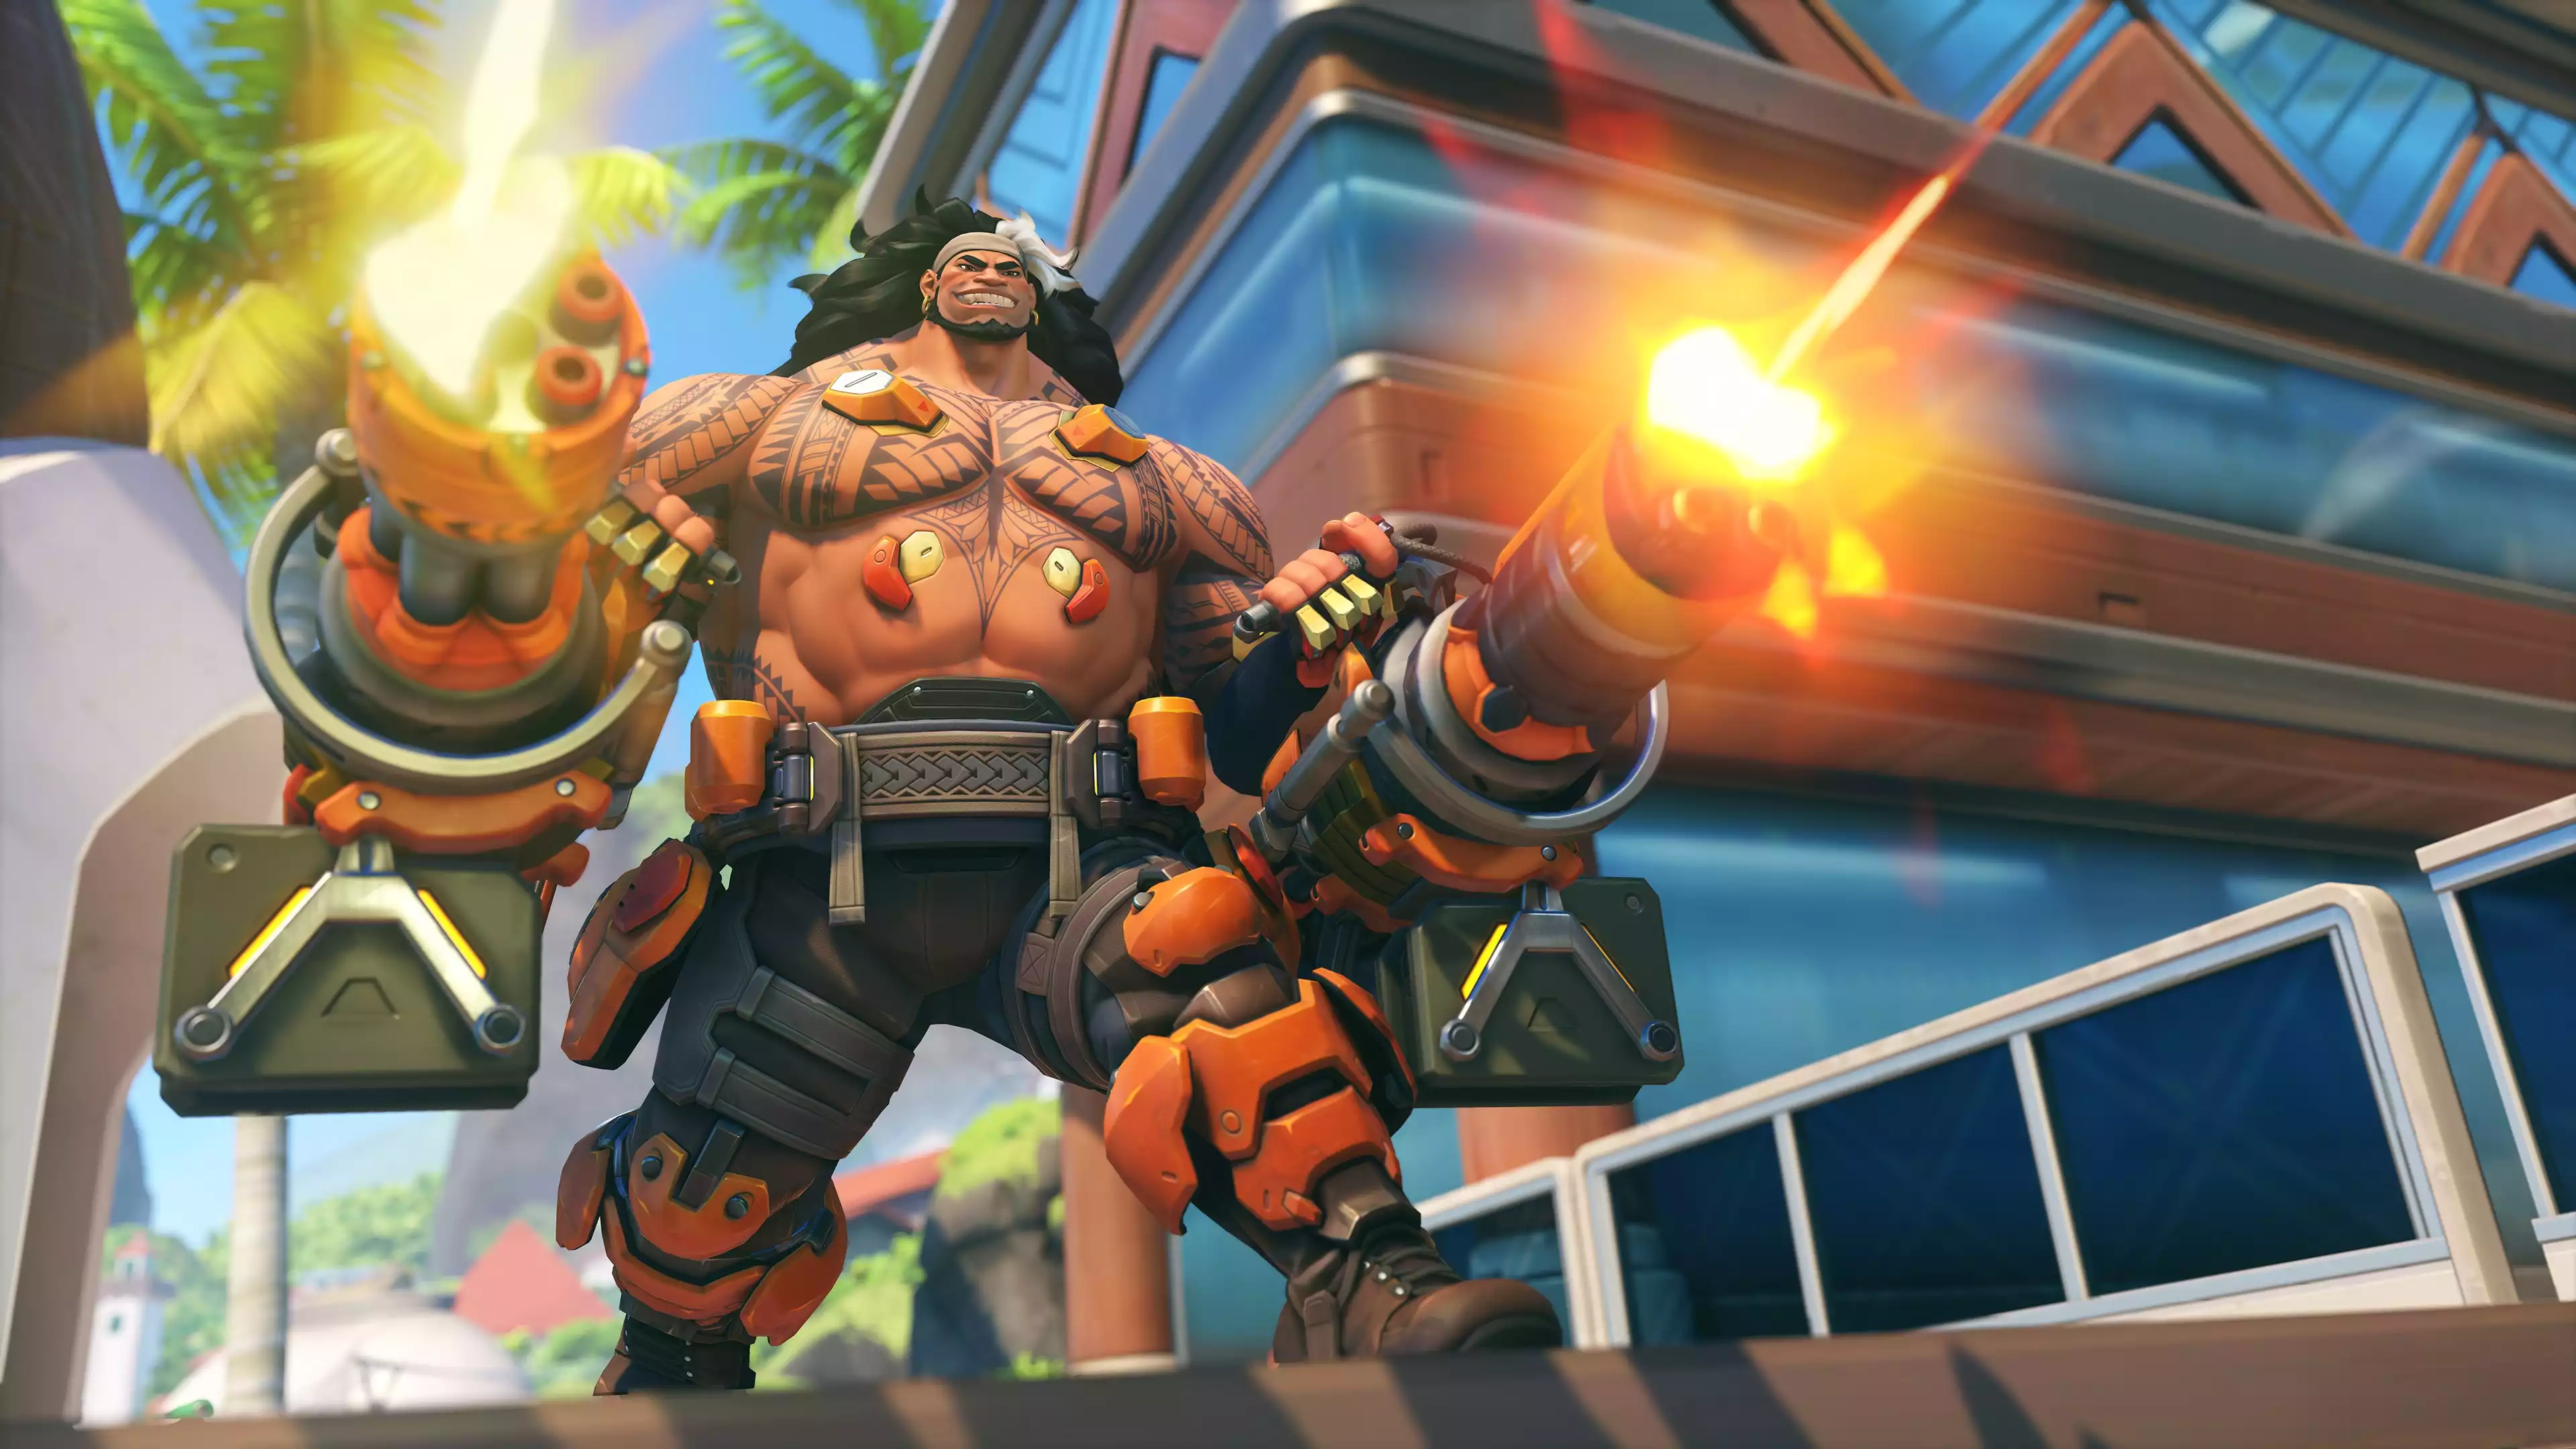 Blizzard reveals Mauga as Overwatch 2’s next hero - and teased two more after him